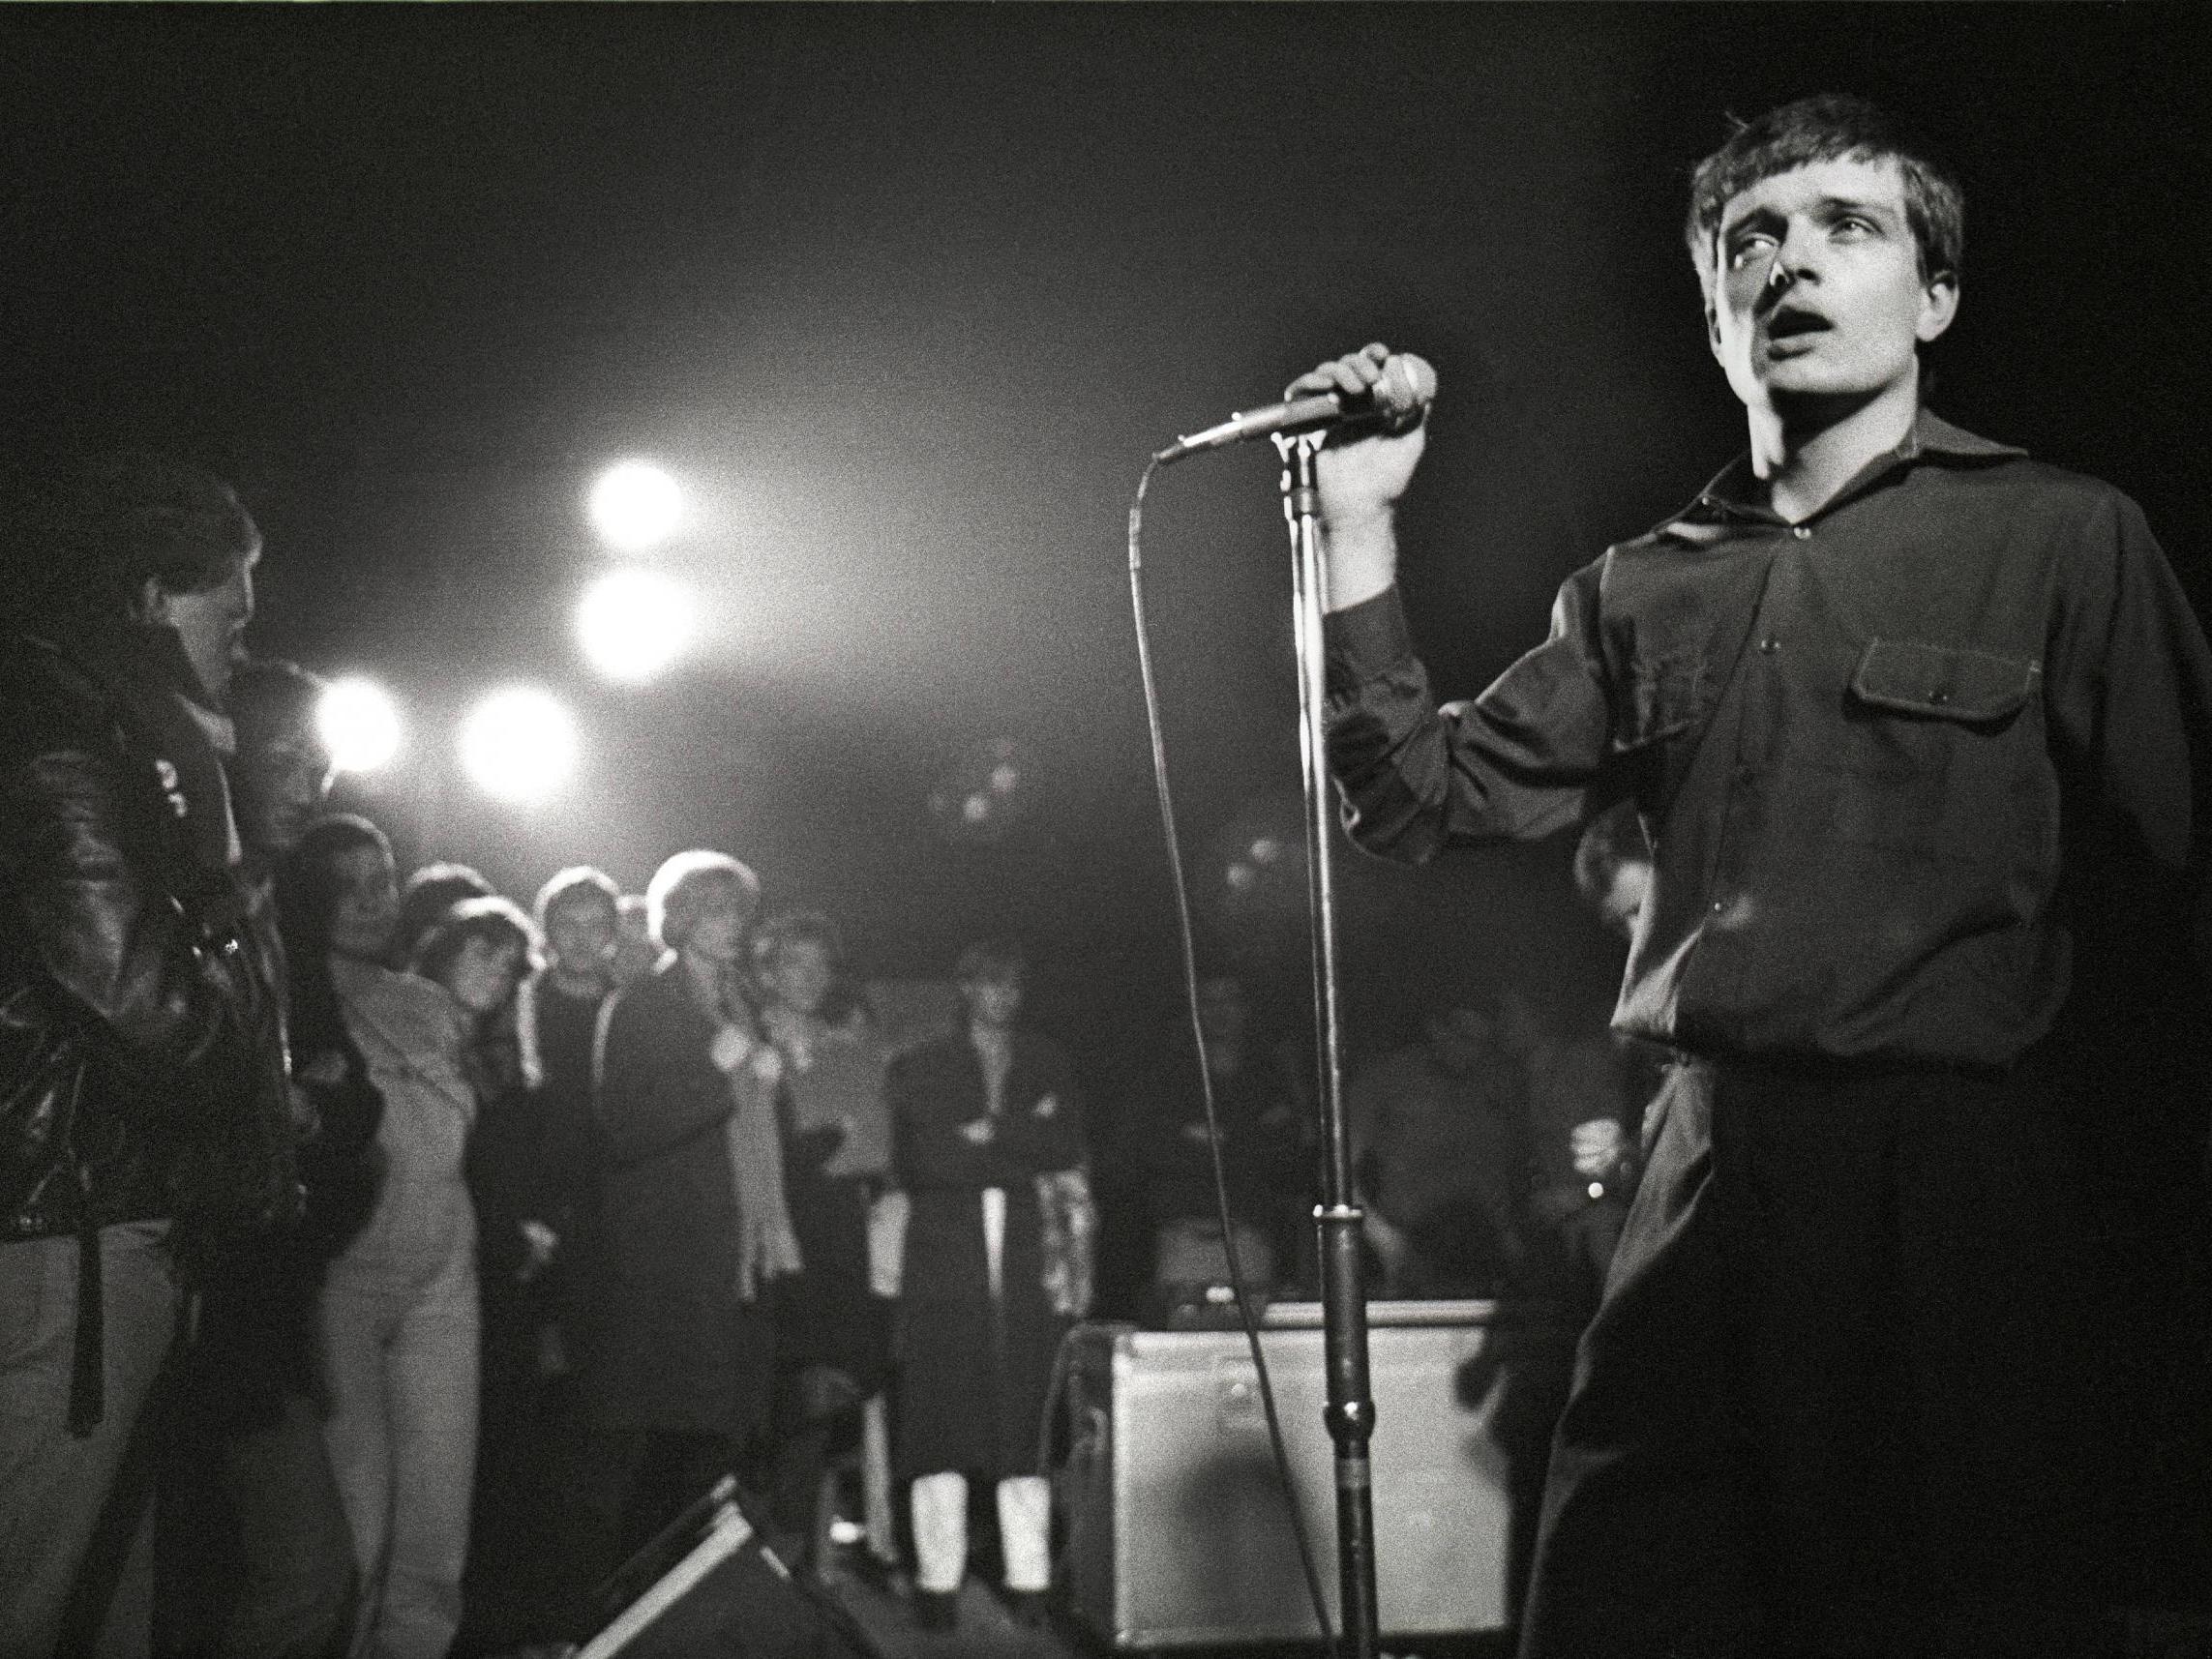 Joy Division leader singer Ian Curtis took his own life in 1980